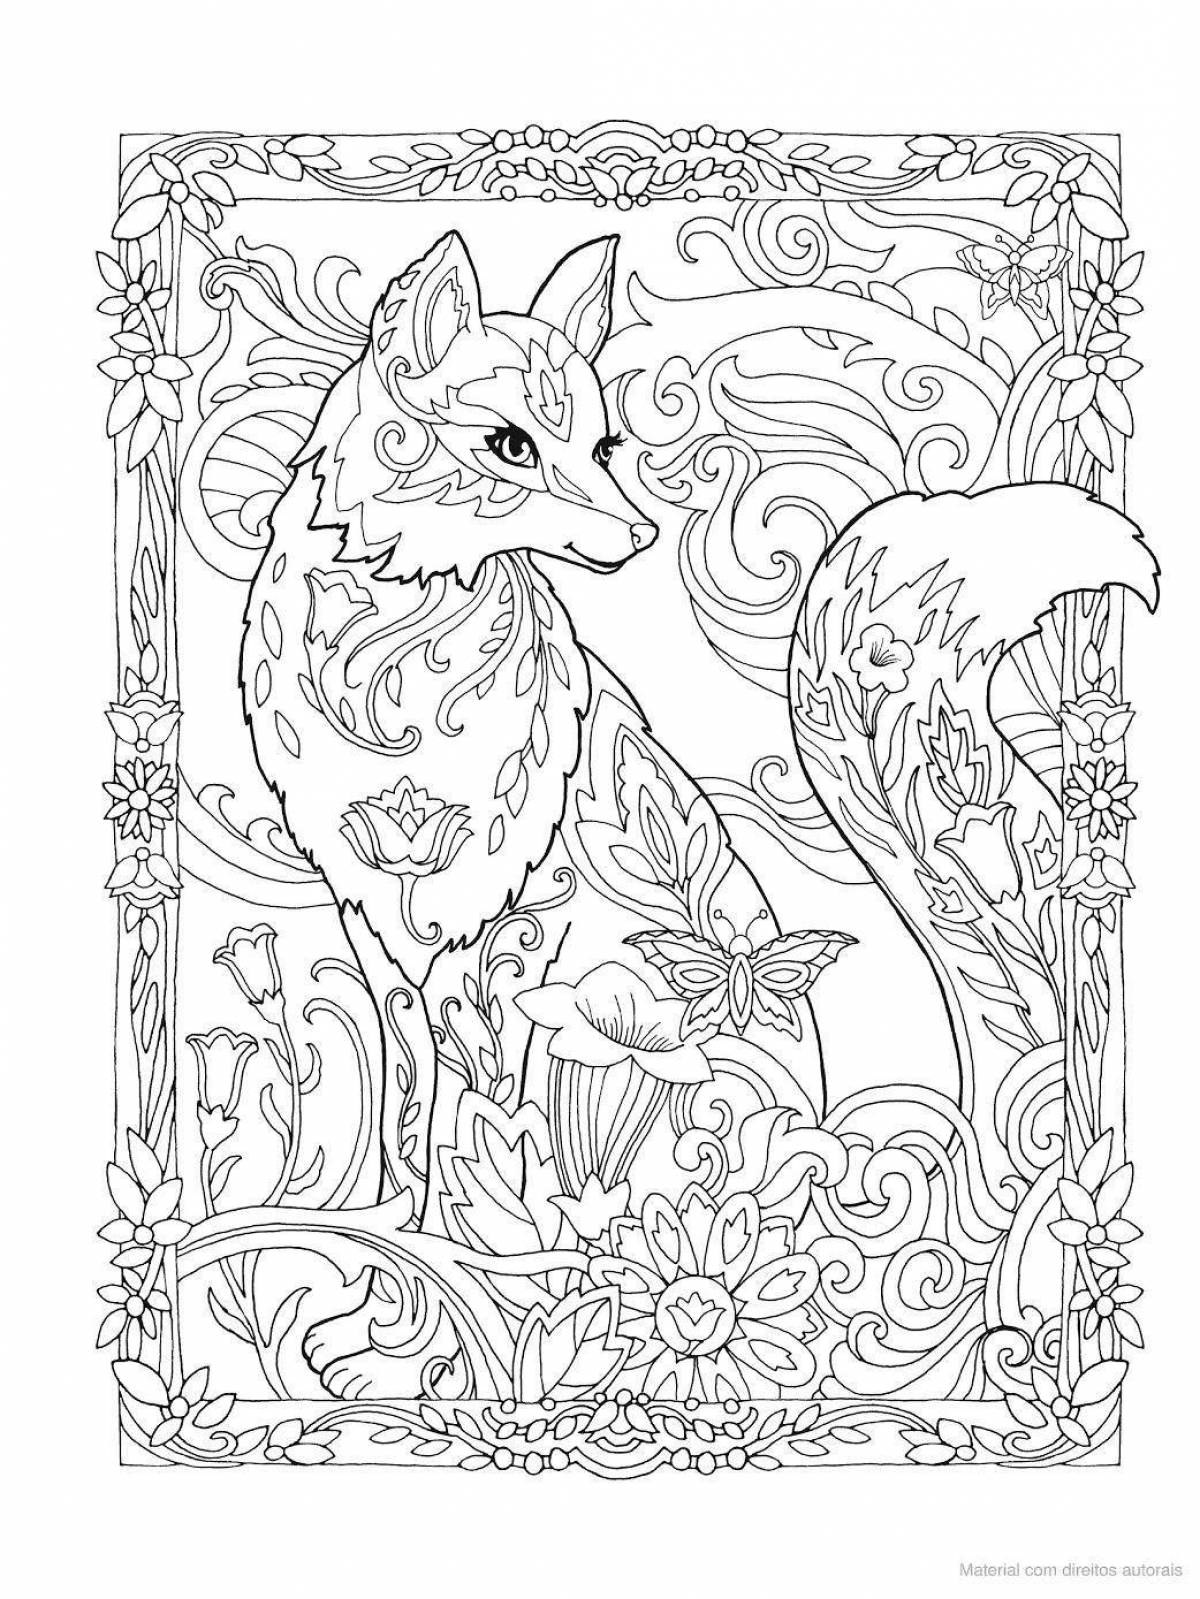 A fun fox coloring book for adults